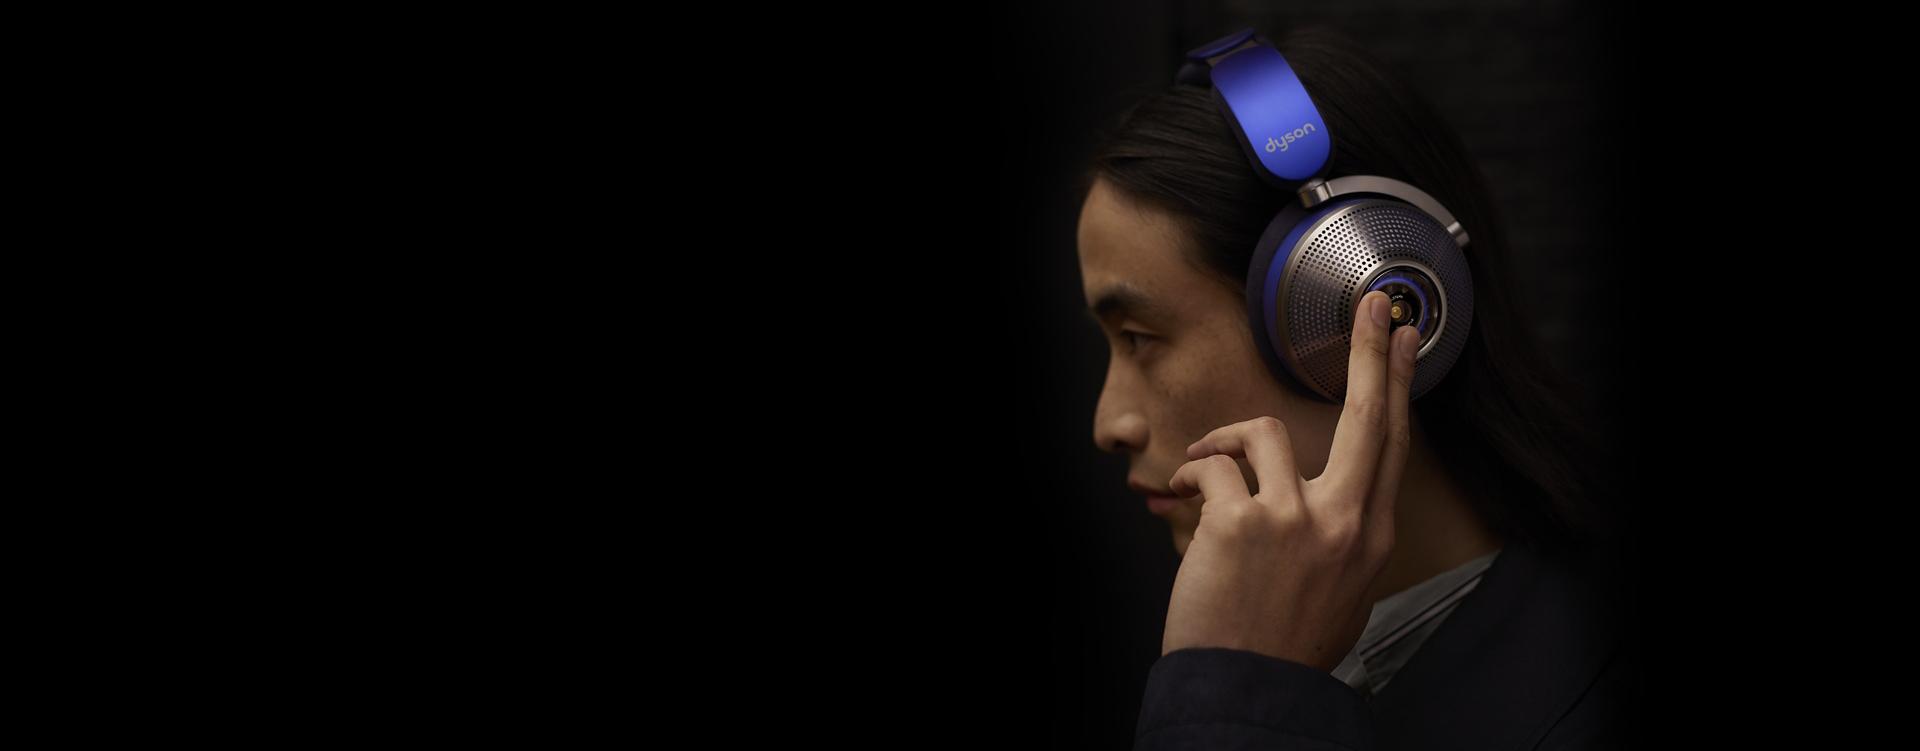 Man looking at camera wearing Dyson zone noise-cancelling headphones.